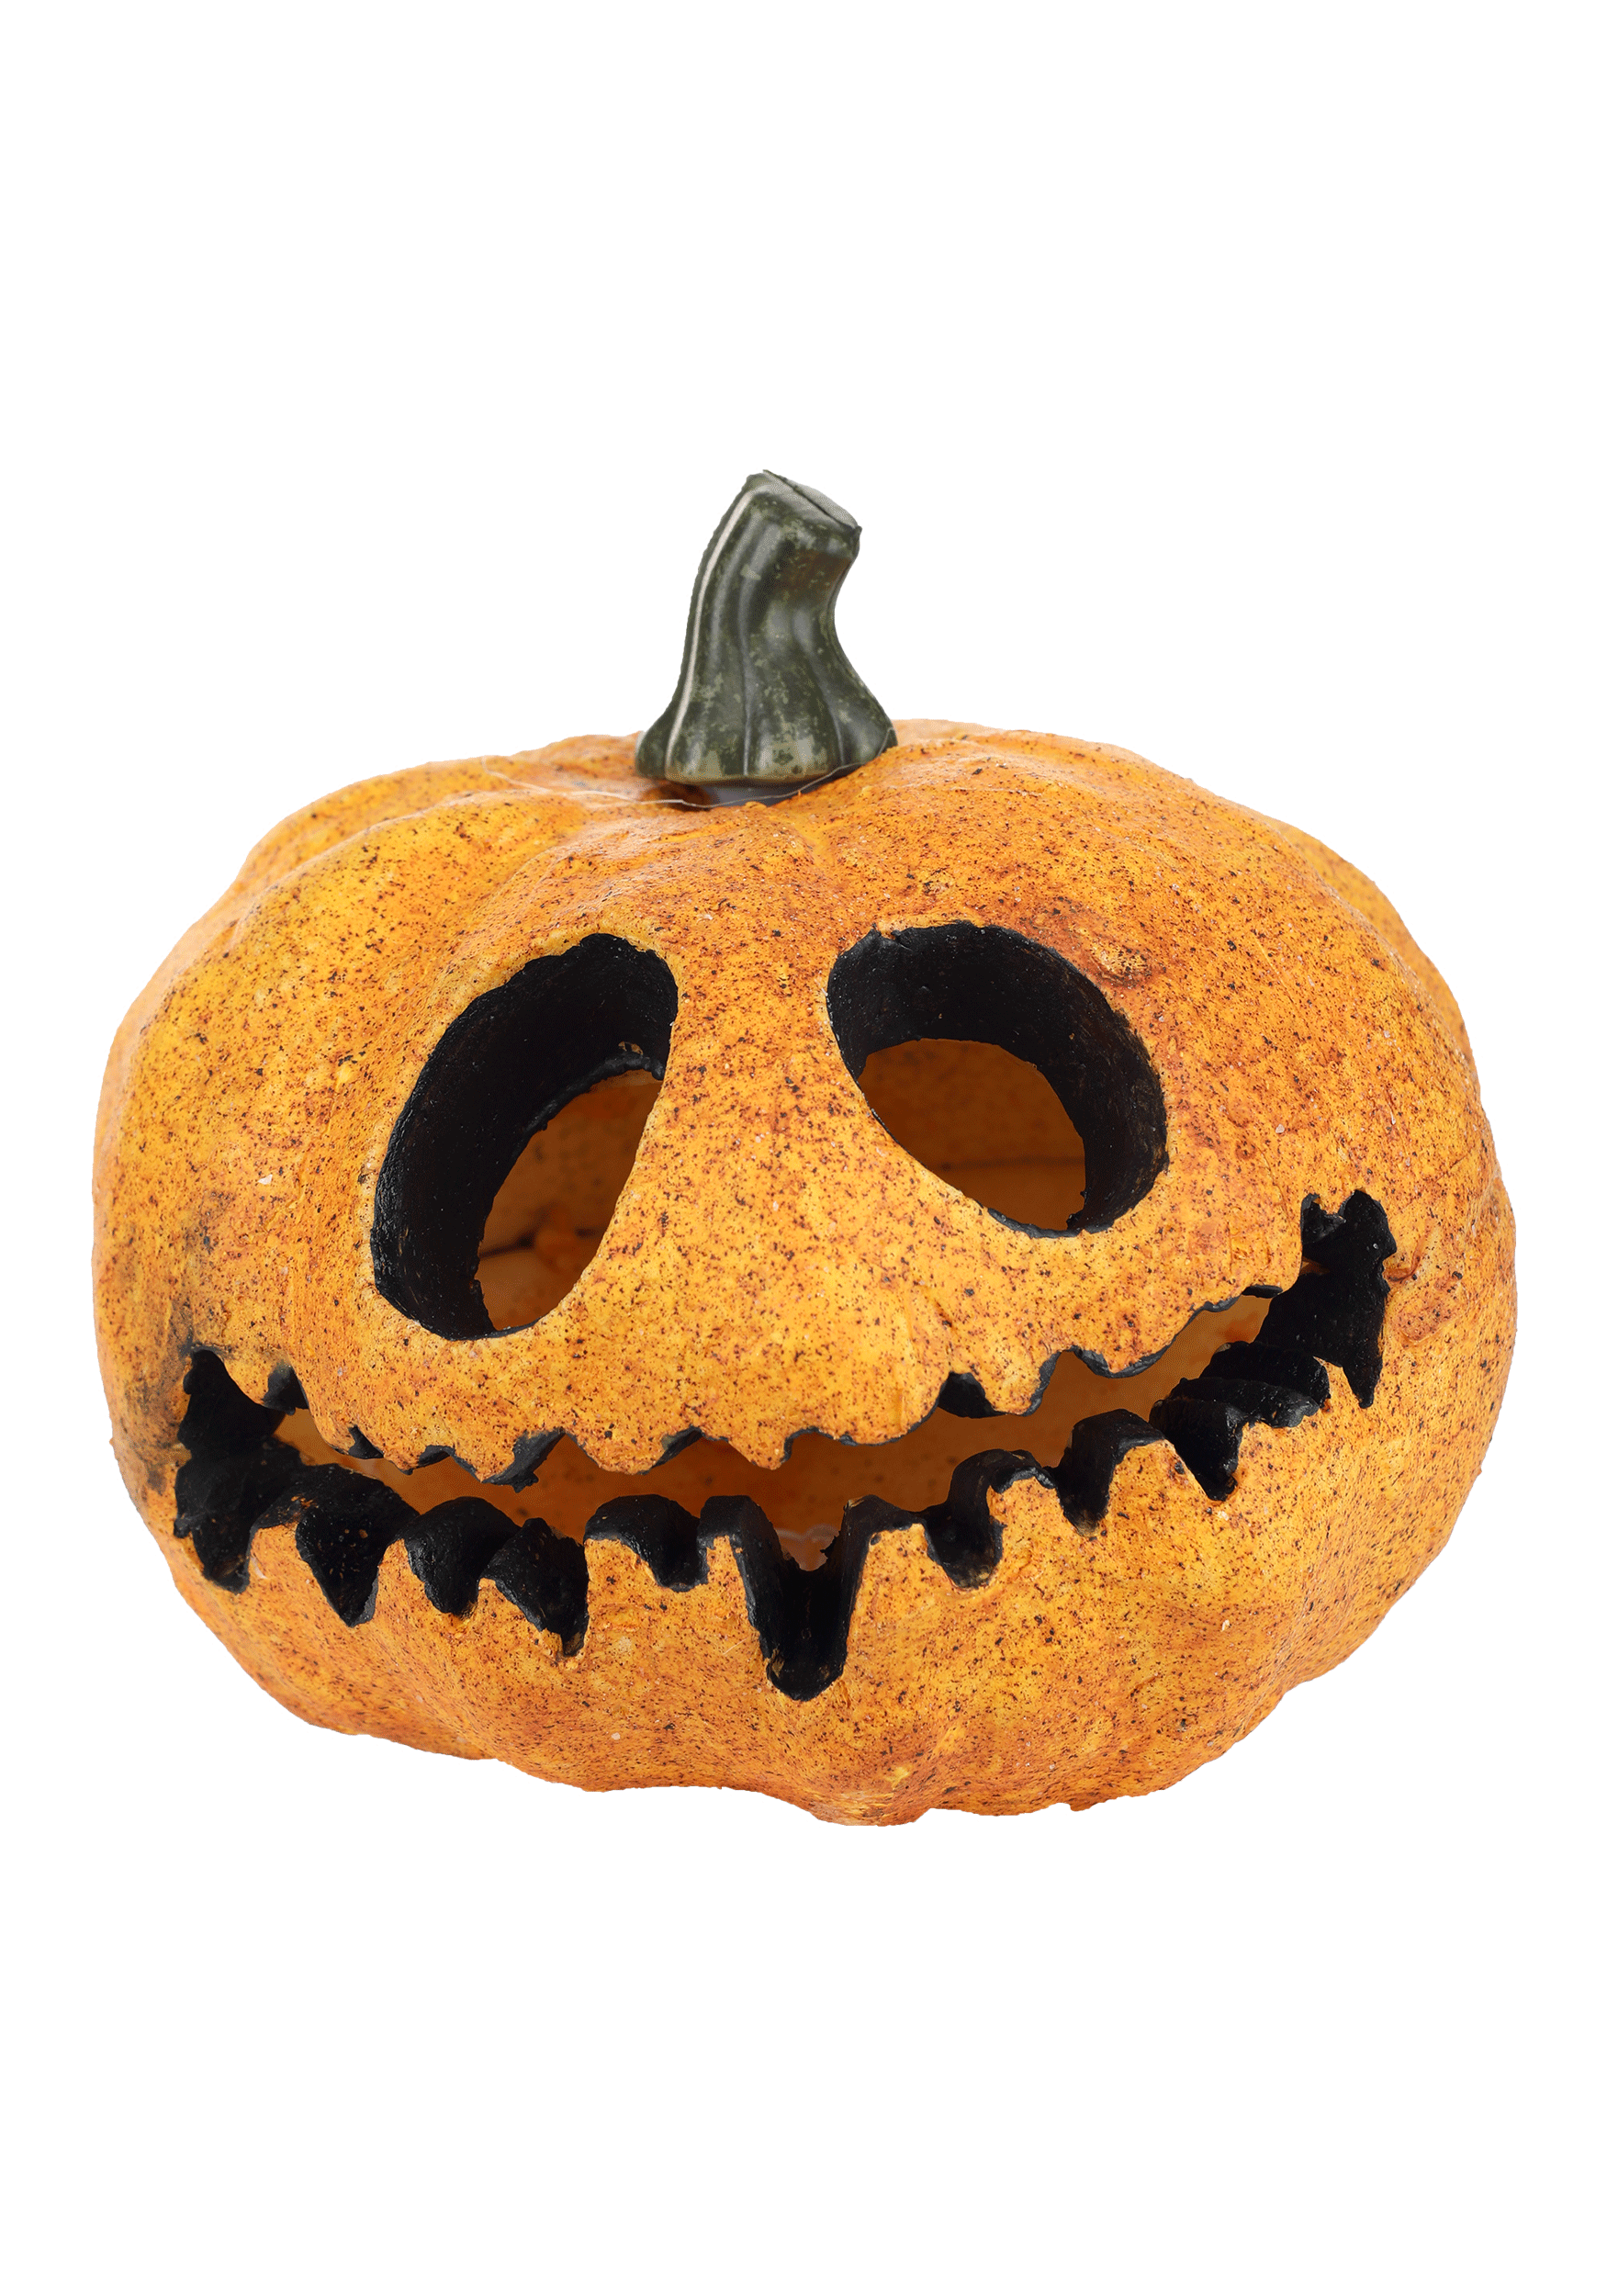 Light Up Spooky Pumpkin with Red Lights